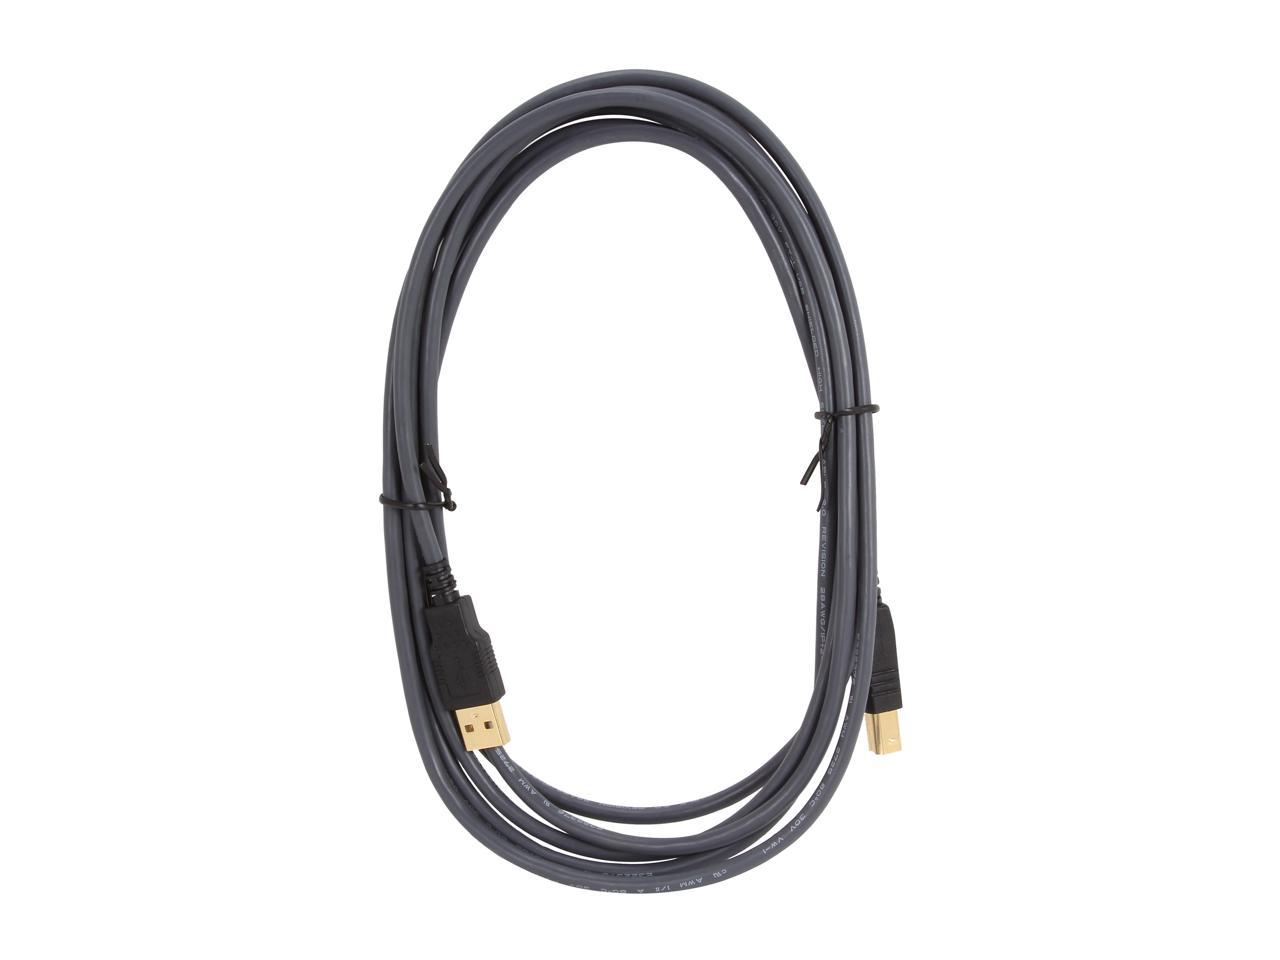 C2G 45003 USB Cable - Ultima USB 2.0 A Male to B Male Cable for Printers, Scanners, Brother, Canon, Dell, Epson, HP and more, Black (9.8 Feet, 3 Meters)